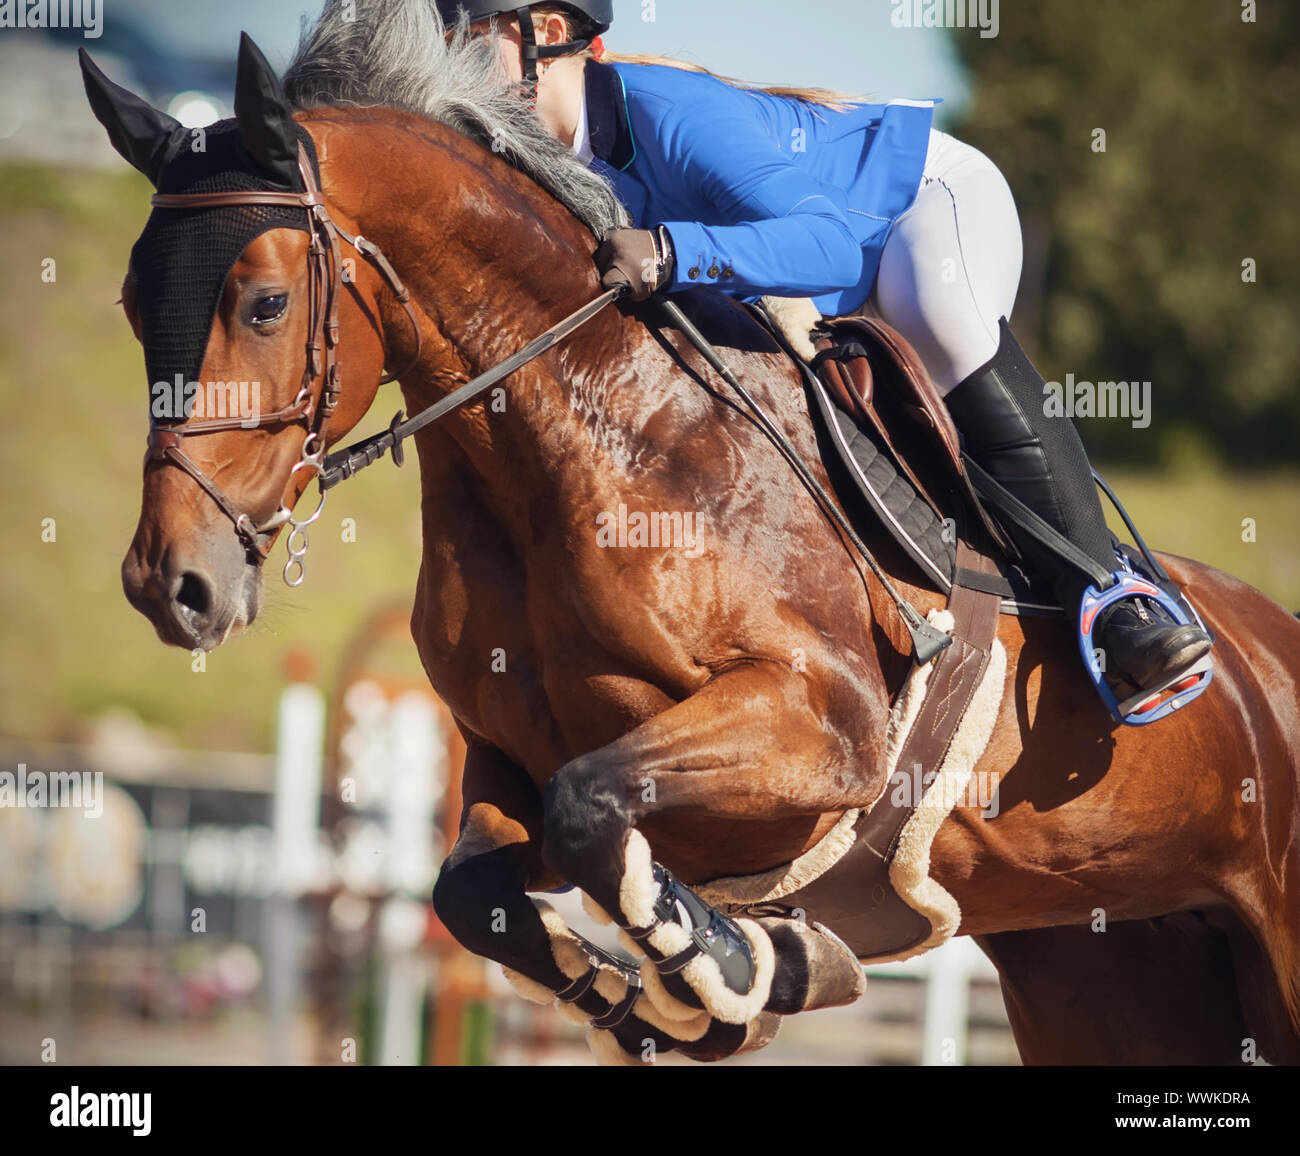 A Bay beautiful horse with a gray mane jumps high at horse show jumping competitions with a rider in a blue suit in the saddle. Stock Photo